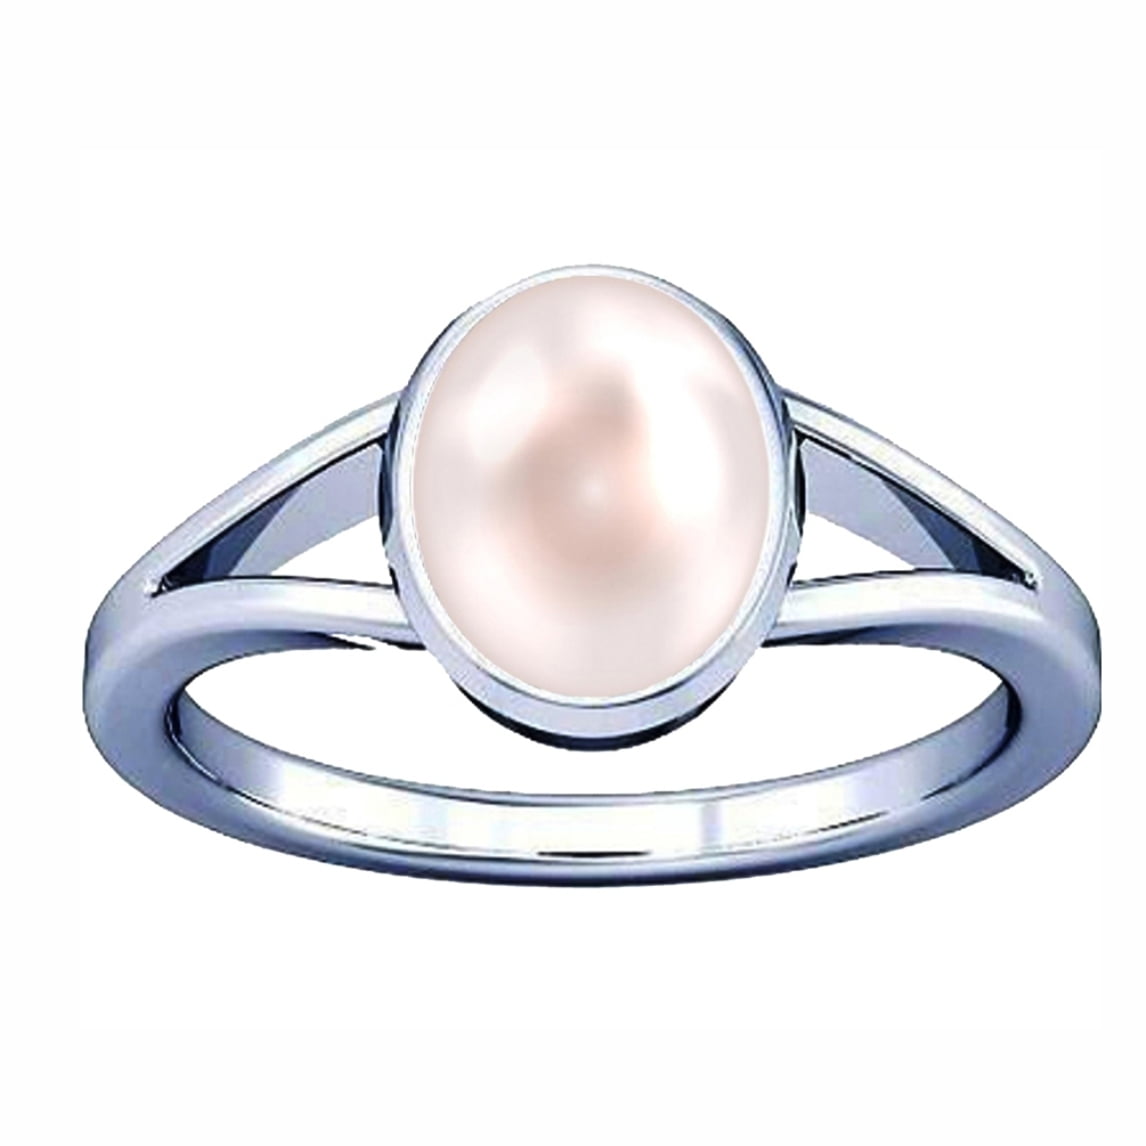 Macy's Cubic Zirconia and Imitation Pearl Stone Ring in Silver Plate,  Created for Macy's - Macy's